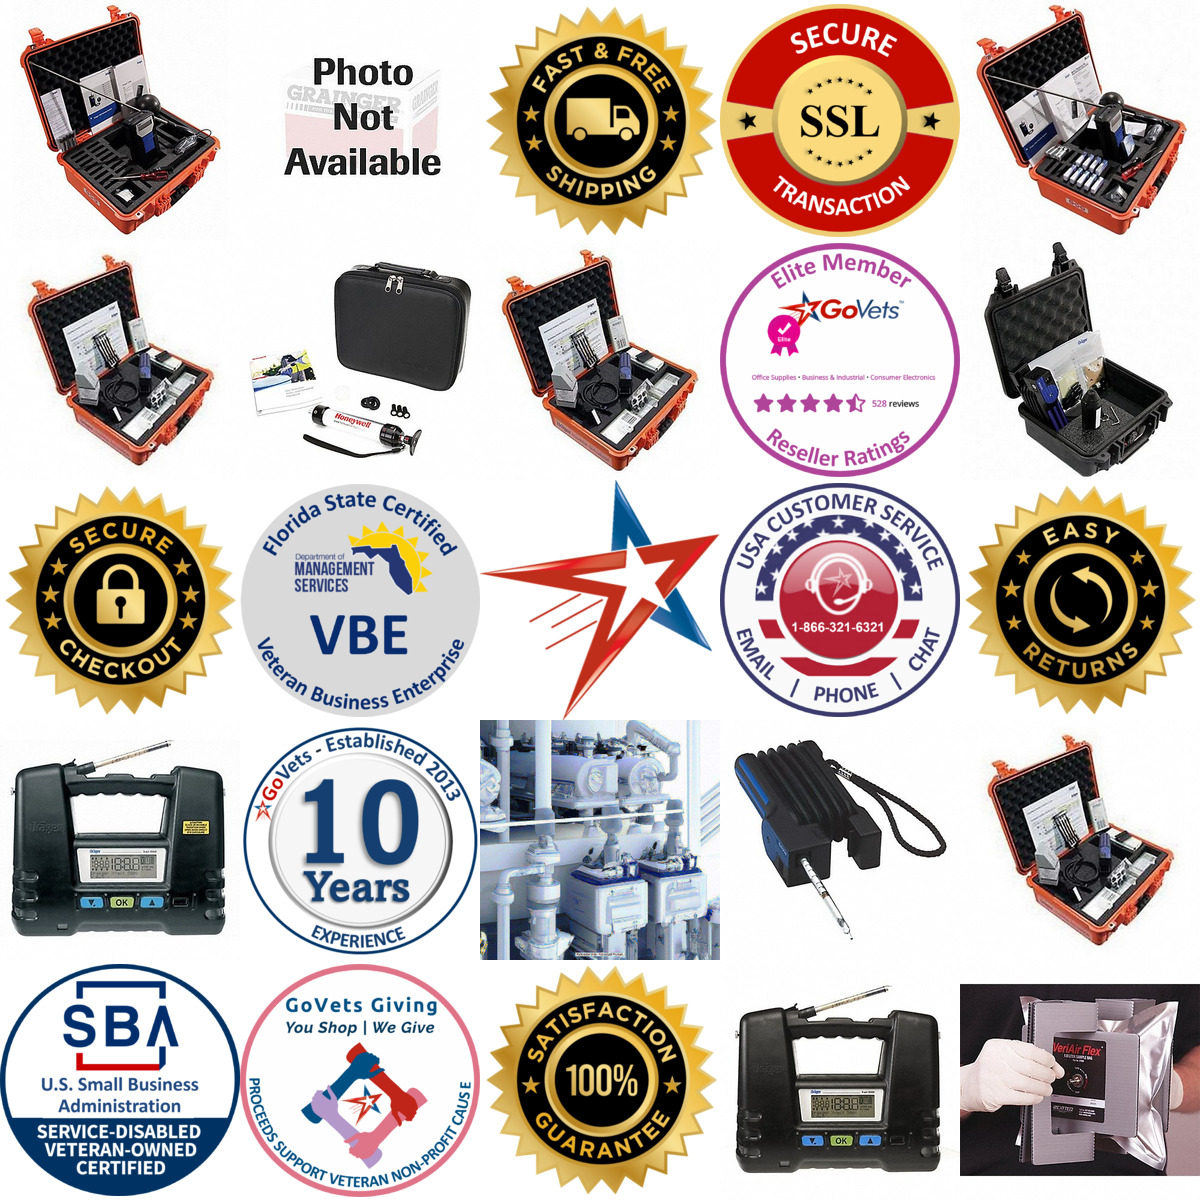 A selection of Detector Tube Pumps and Kits products on GoVets